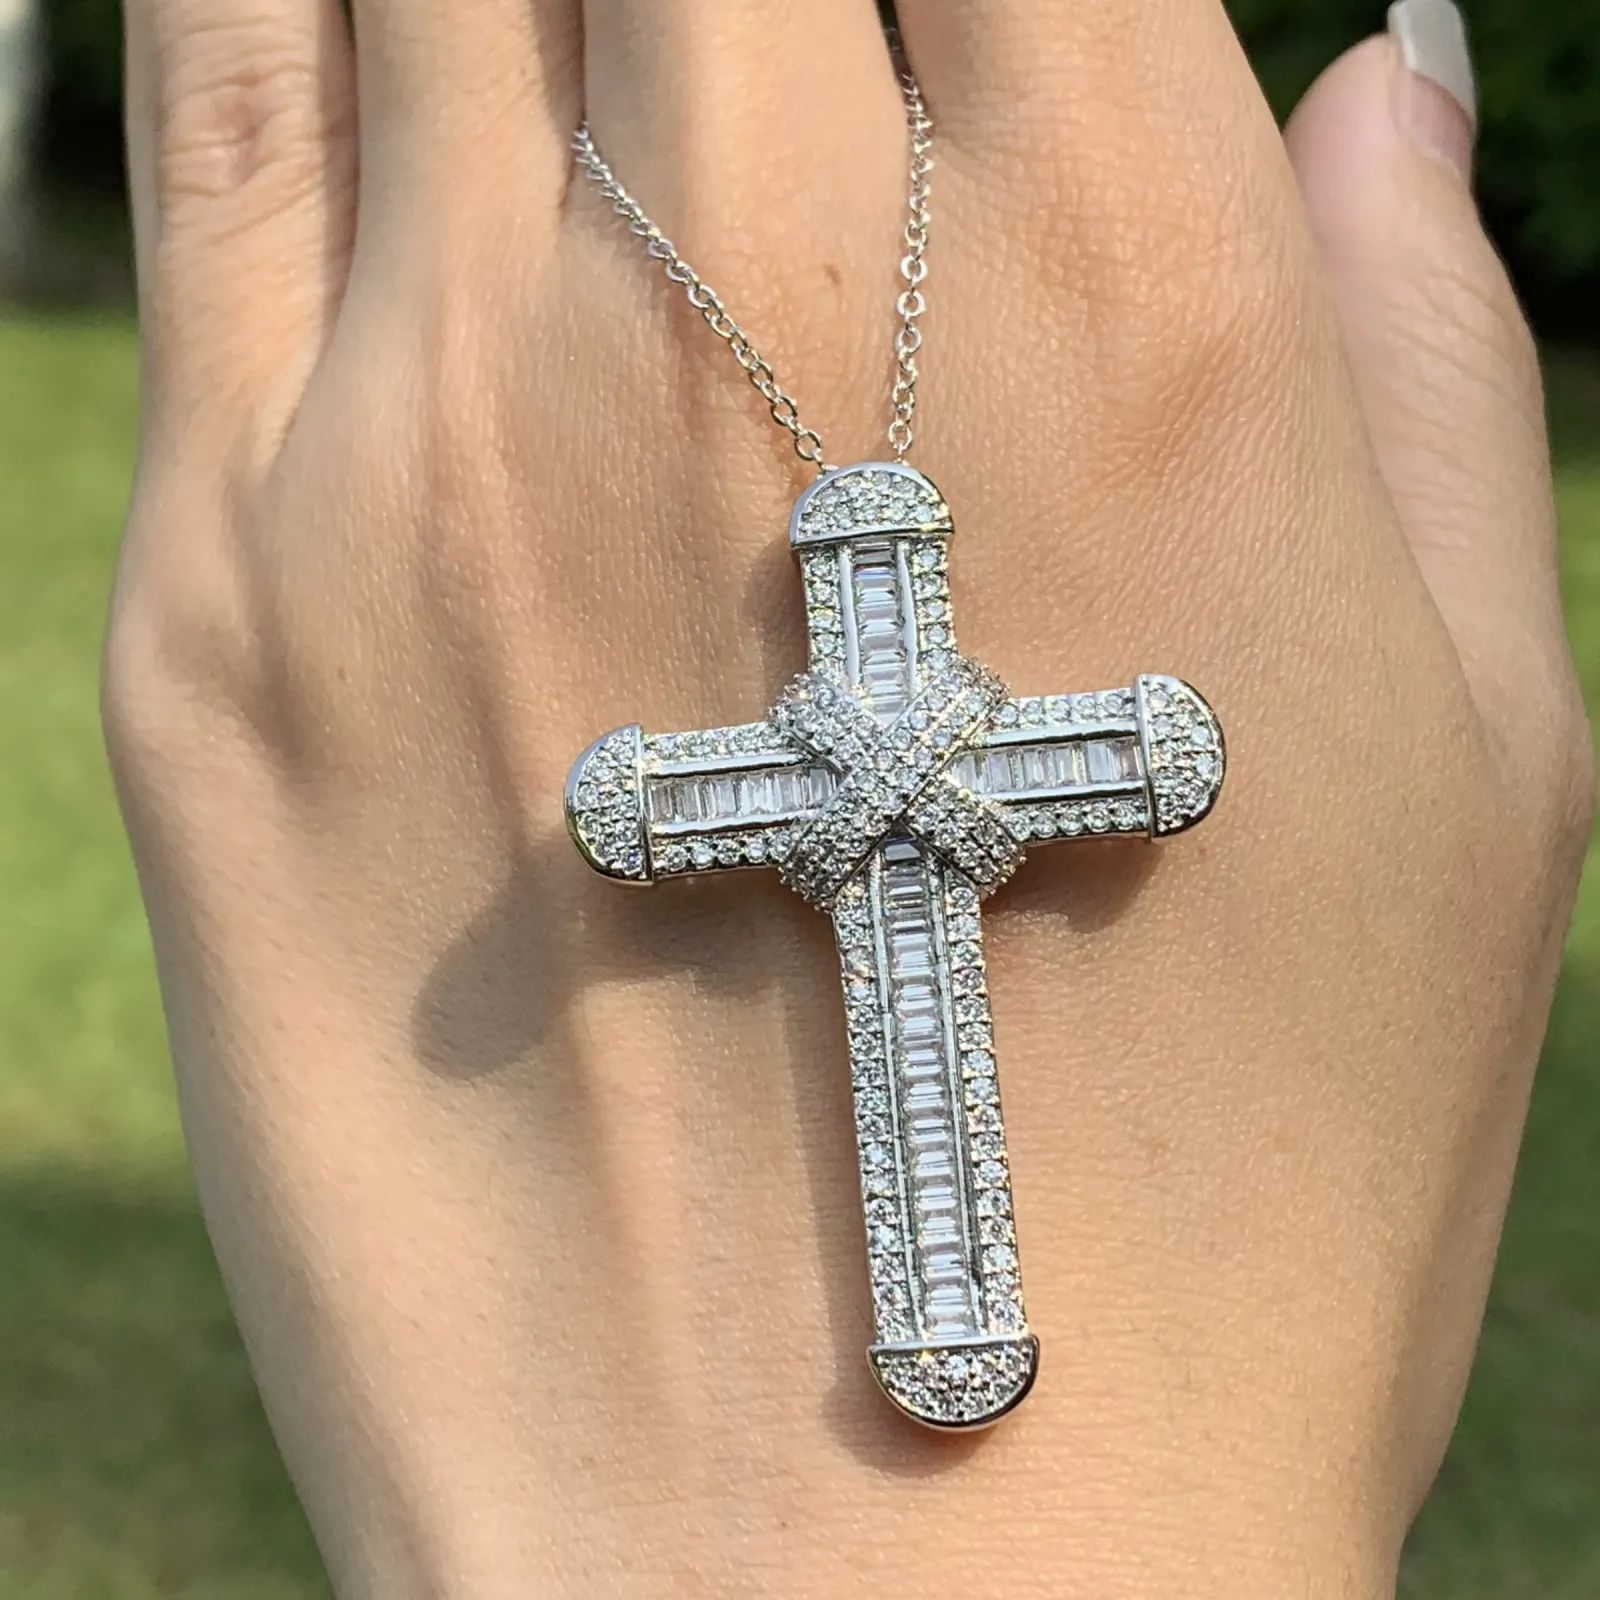 Victoria Wieck Luxury Jewelry Real 925 Sterling Silver Pave White Topaz CZ Diamond Gemstones Cross Pendant Lucky Women Necklace For Party